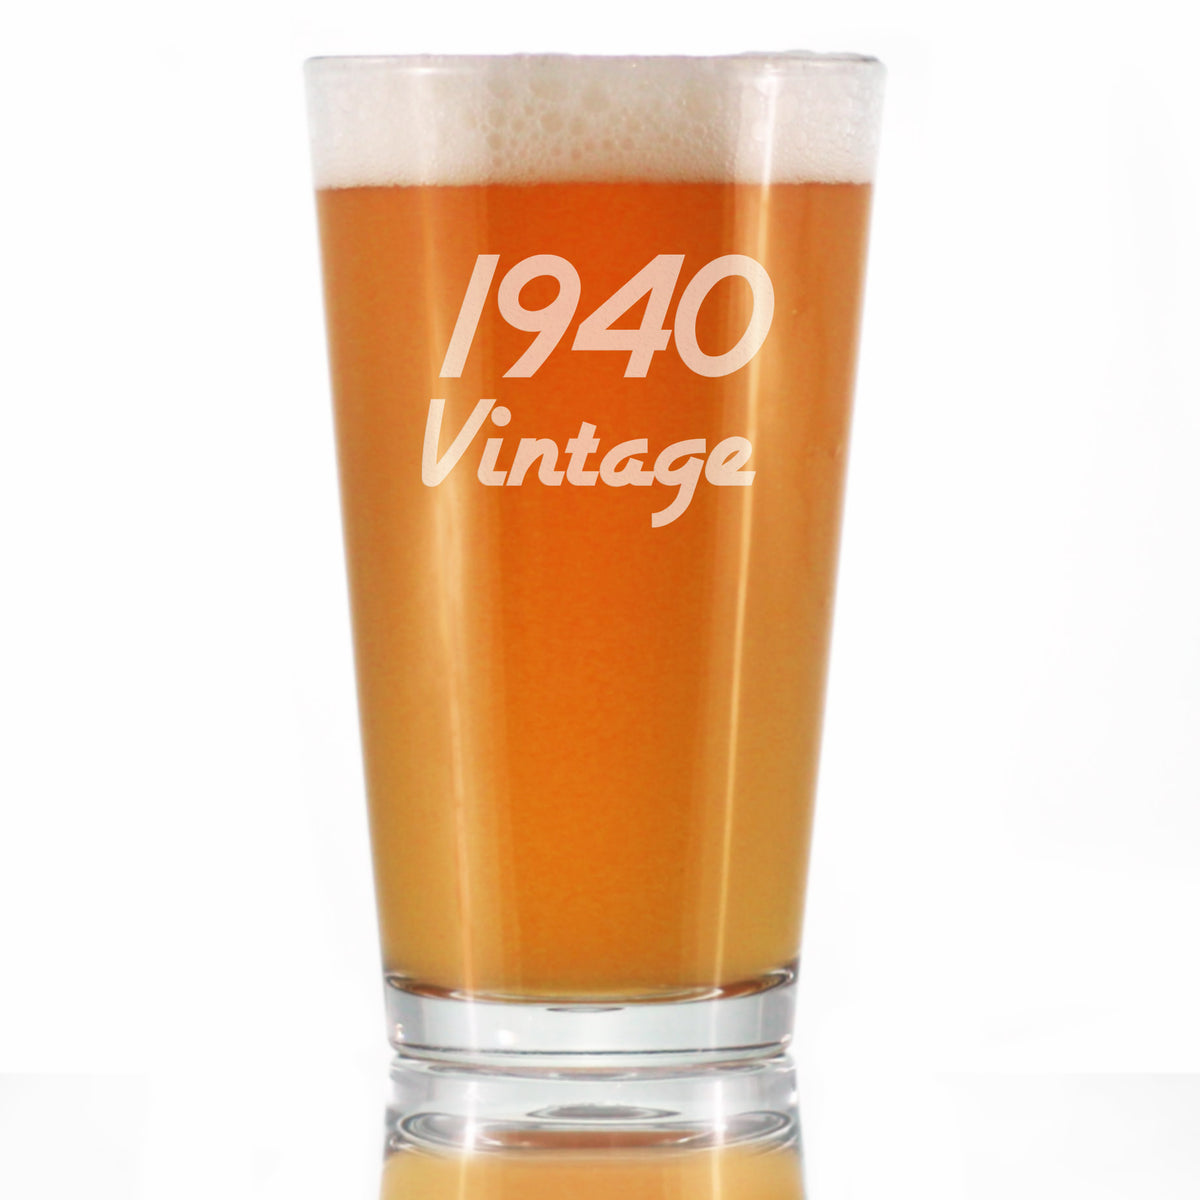 Vintage 1940 - Pint Glass for Beer - 83rd Birthday Gifts for Men or Women Turning 83 - Fun Bday Party Decor - 16 oz